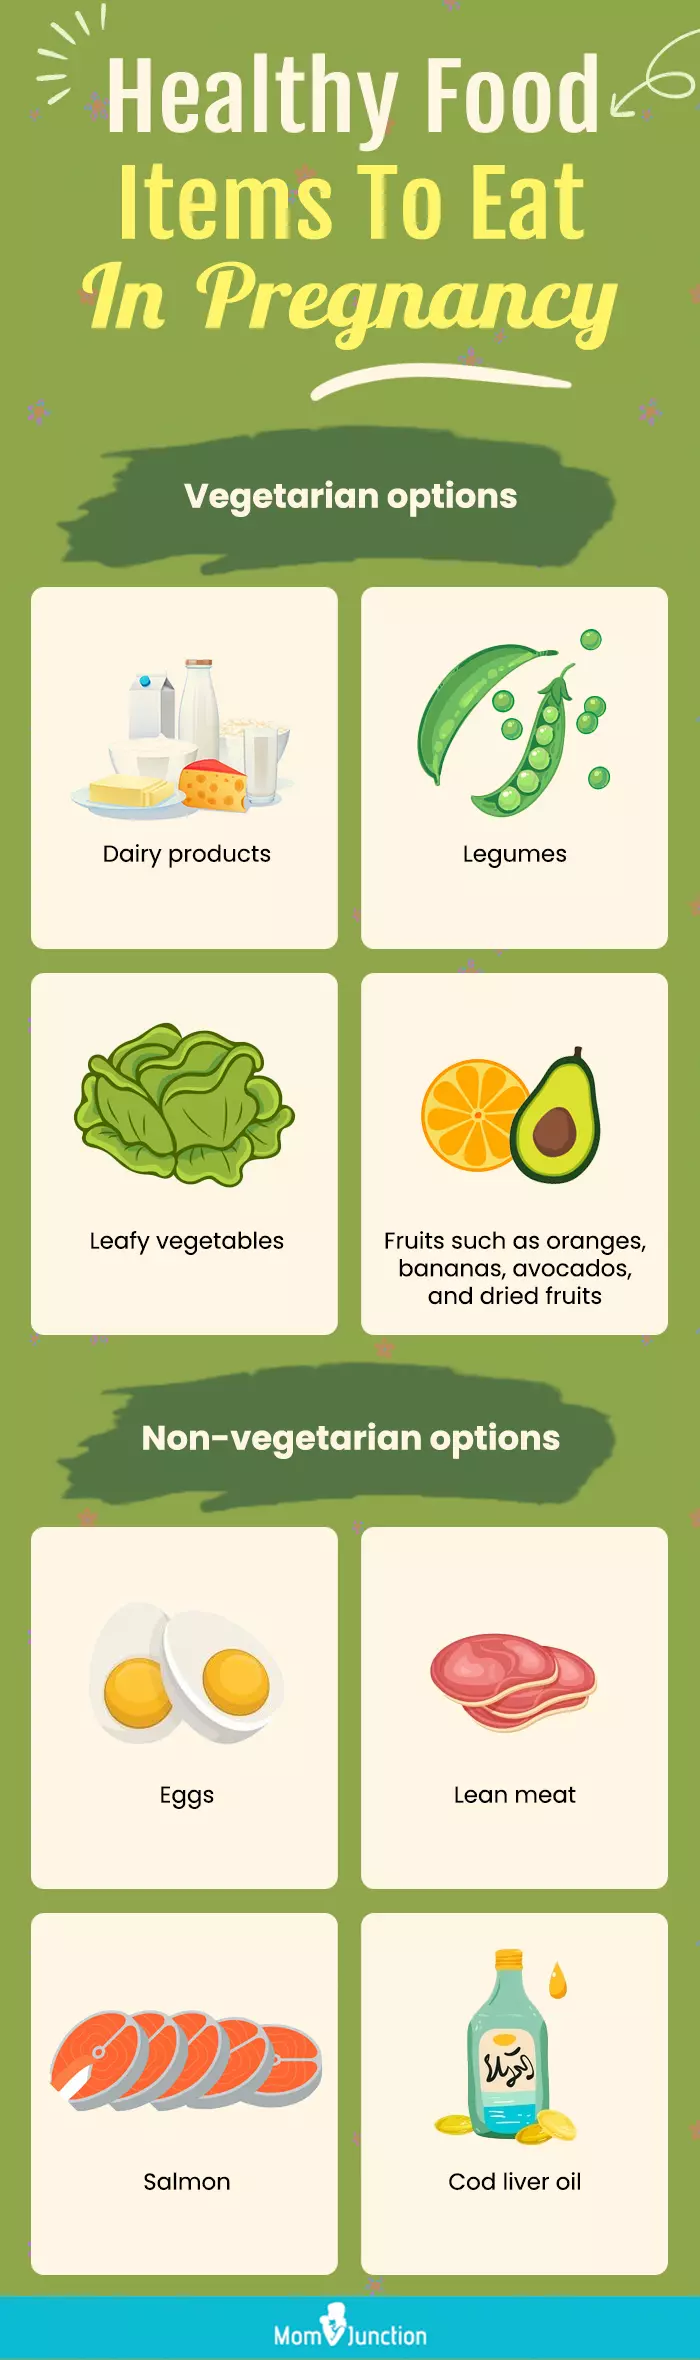 healthy food items to eat in pregnancy (infographic)